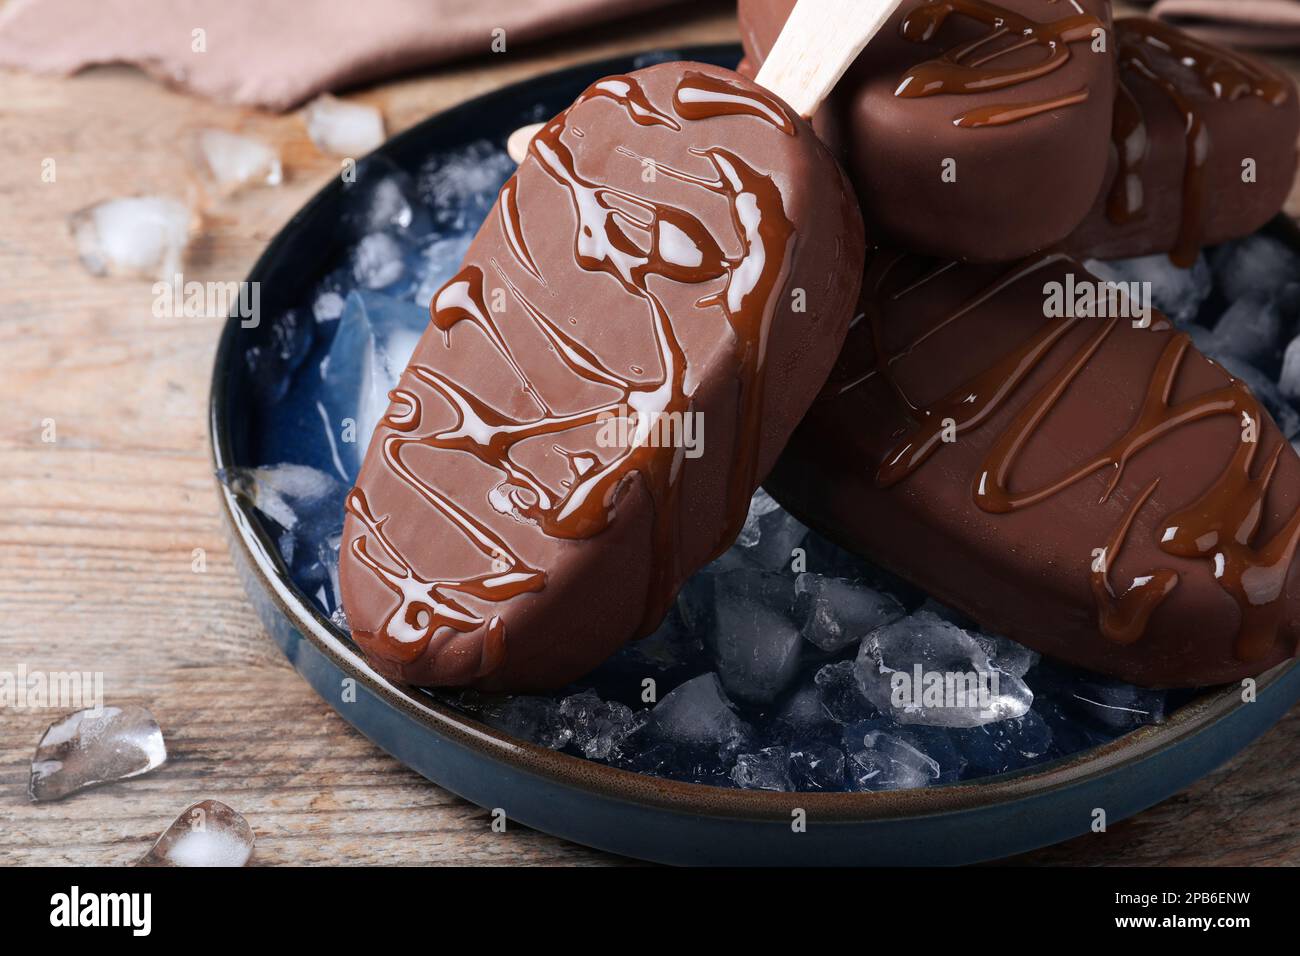 Delicious glazed ice cream bars and ice cubes on wooden table, closeup Stock Photo